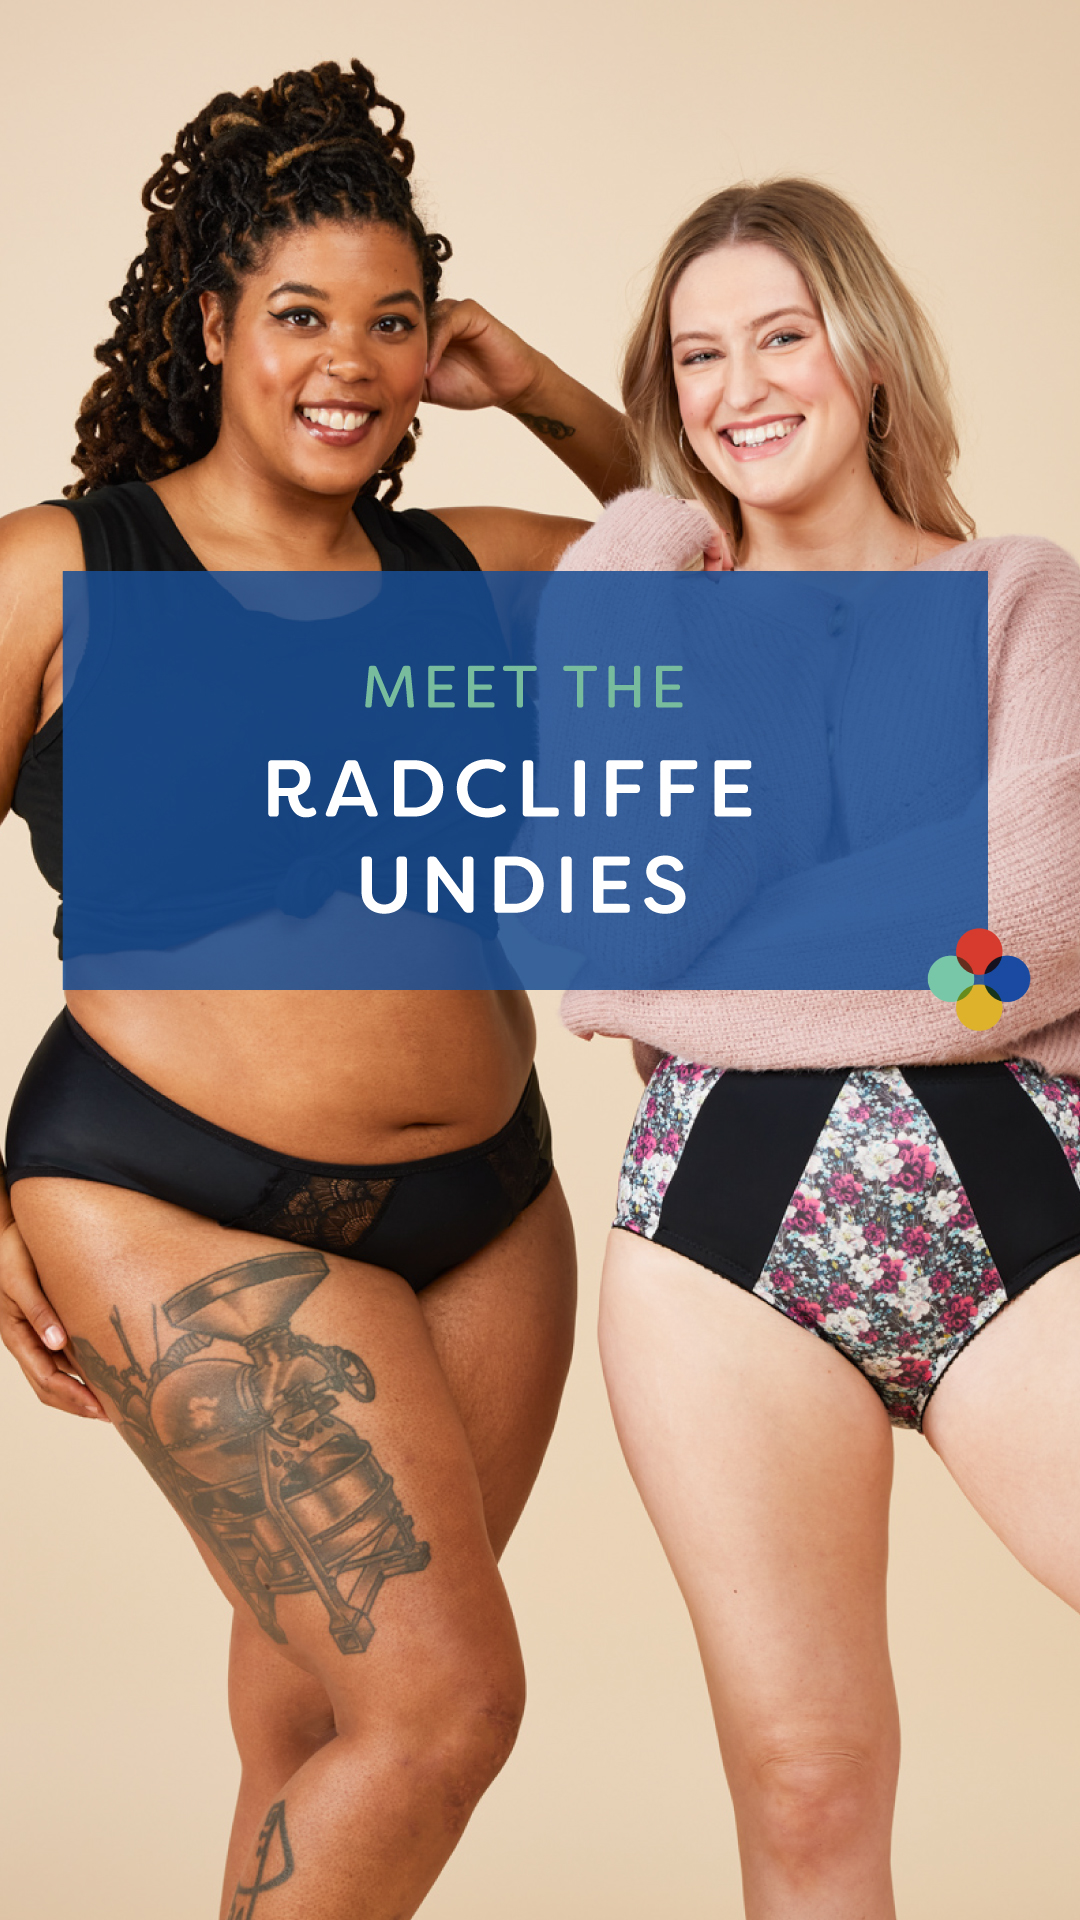 Cashmerette Club: Meet the Radcliffe Undies, the Club pattern for August!